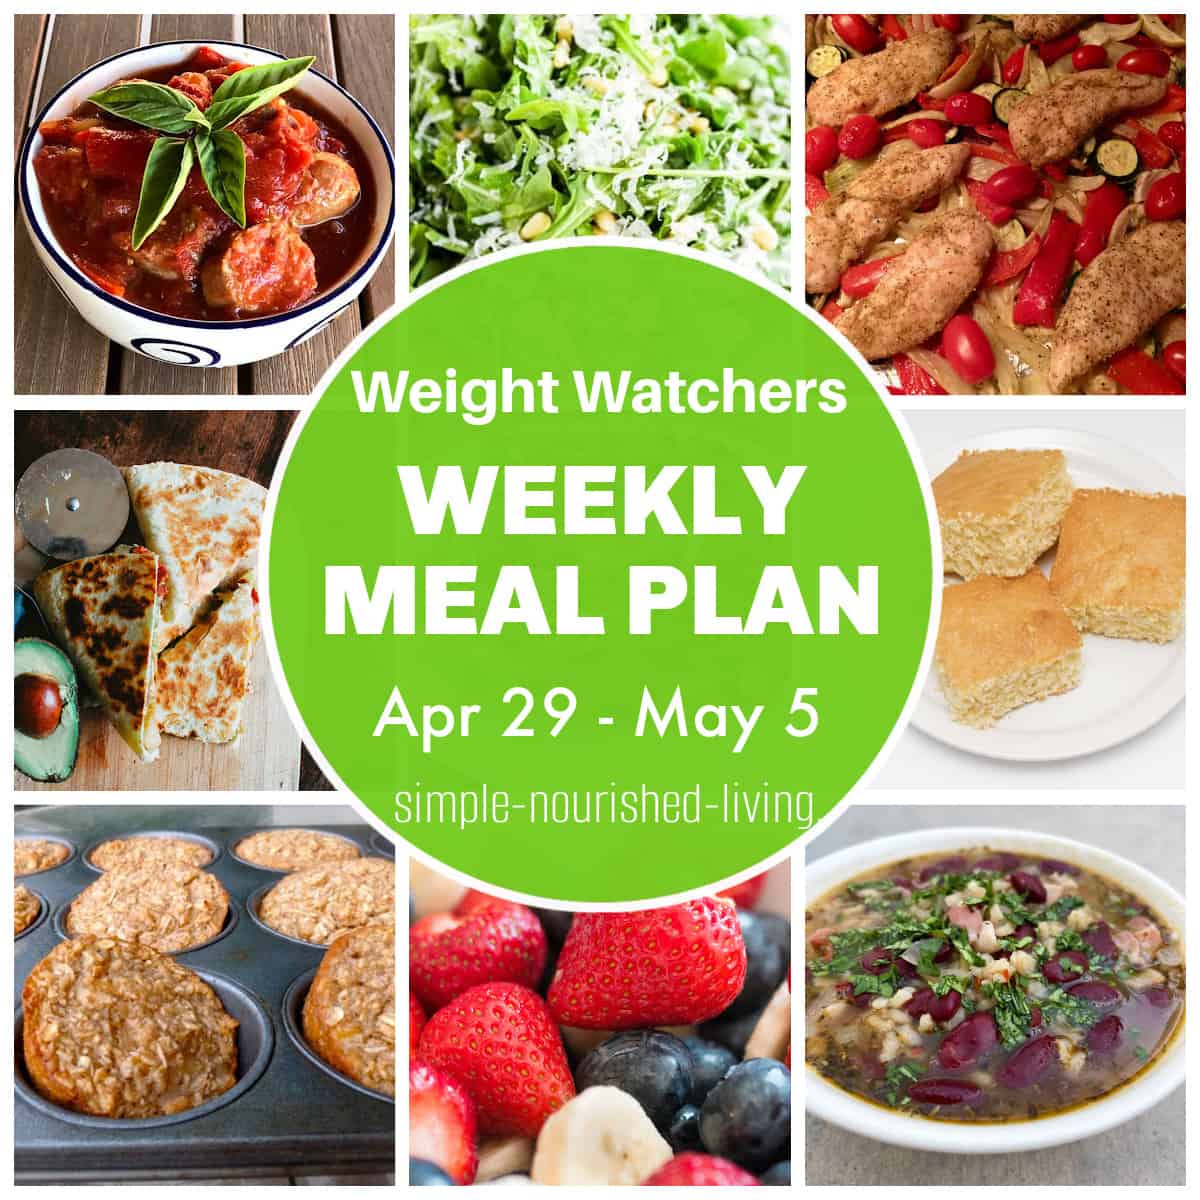 WW Meal Plan Collage of Sausage and Peppers, Arugula Salad, Cornbread, Quesadilla, Oatmeal Muffin Cups, Red Beans and Rice Soup and Fresh Strawberries and Blueberries.